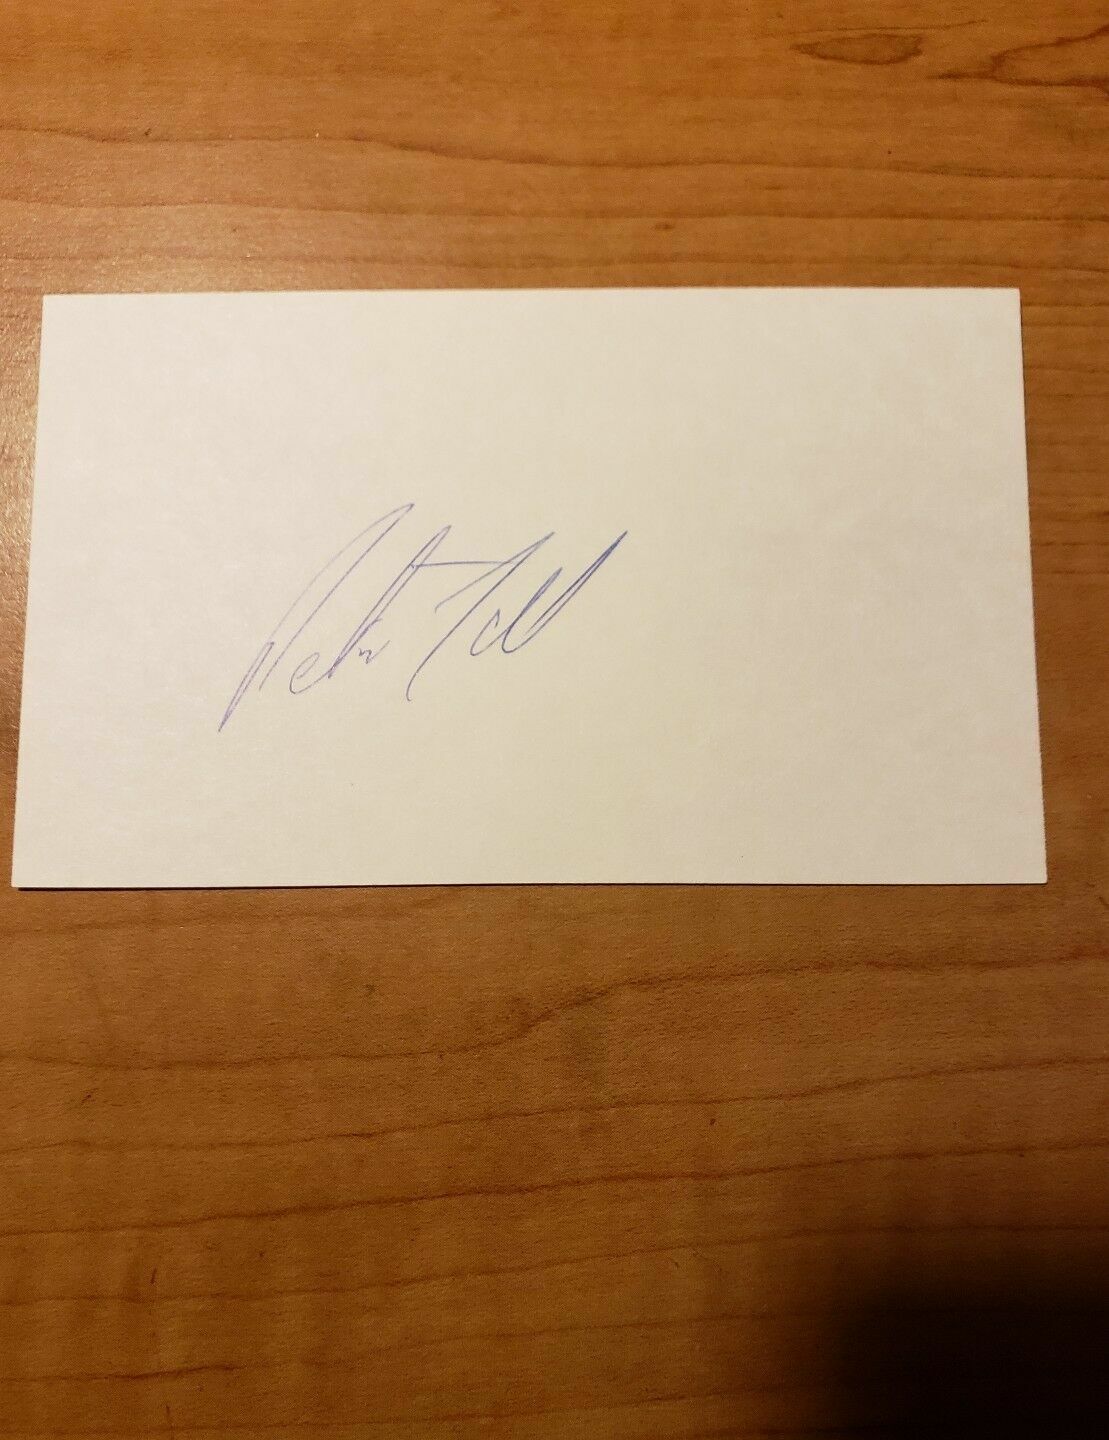 PETER TILL - BOXER - AUTOGRAPH SIGNED - INDEX CARD -AUTHENTIC - A2321